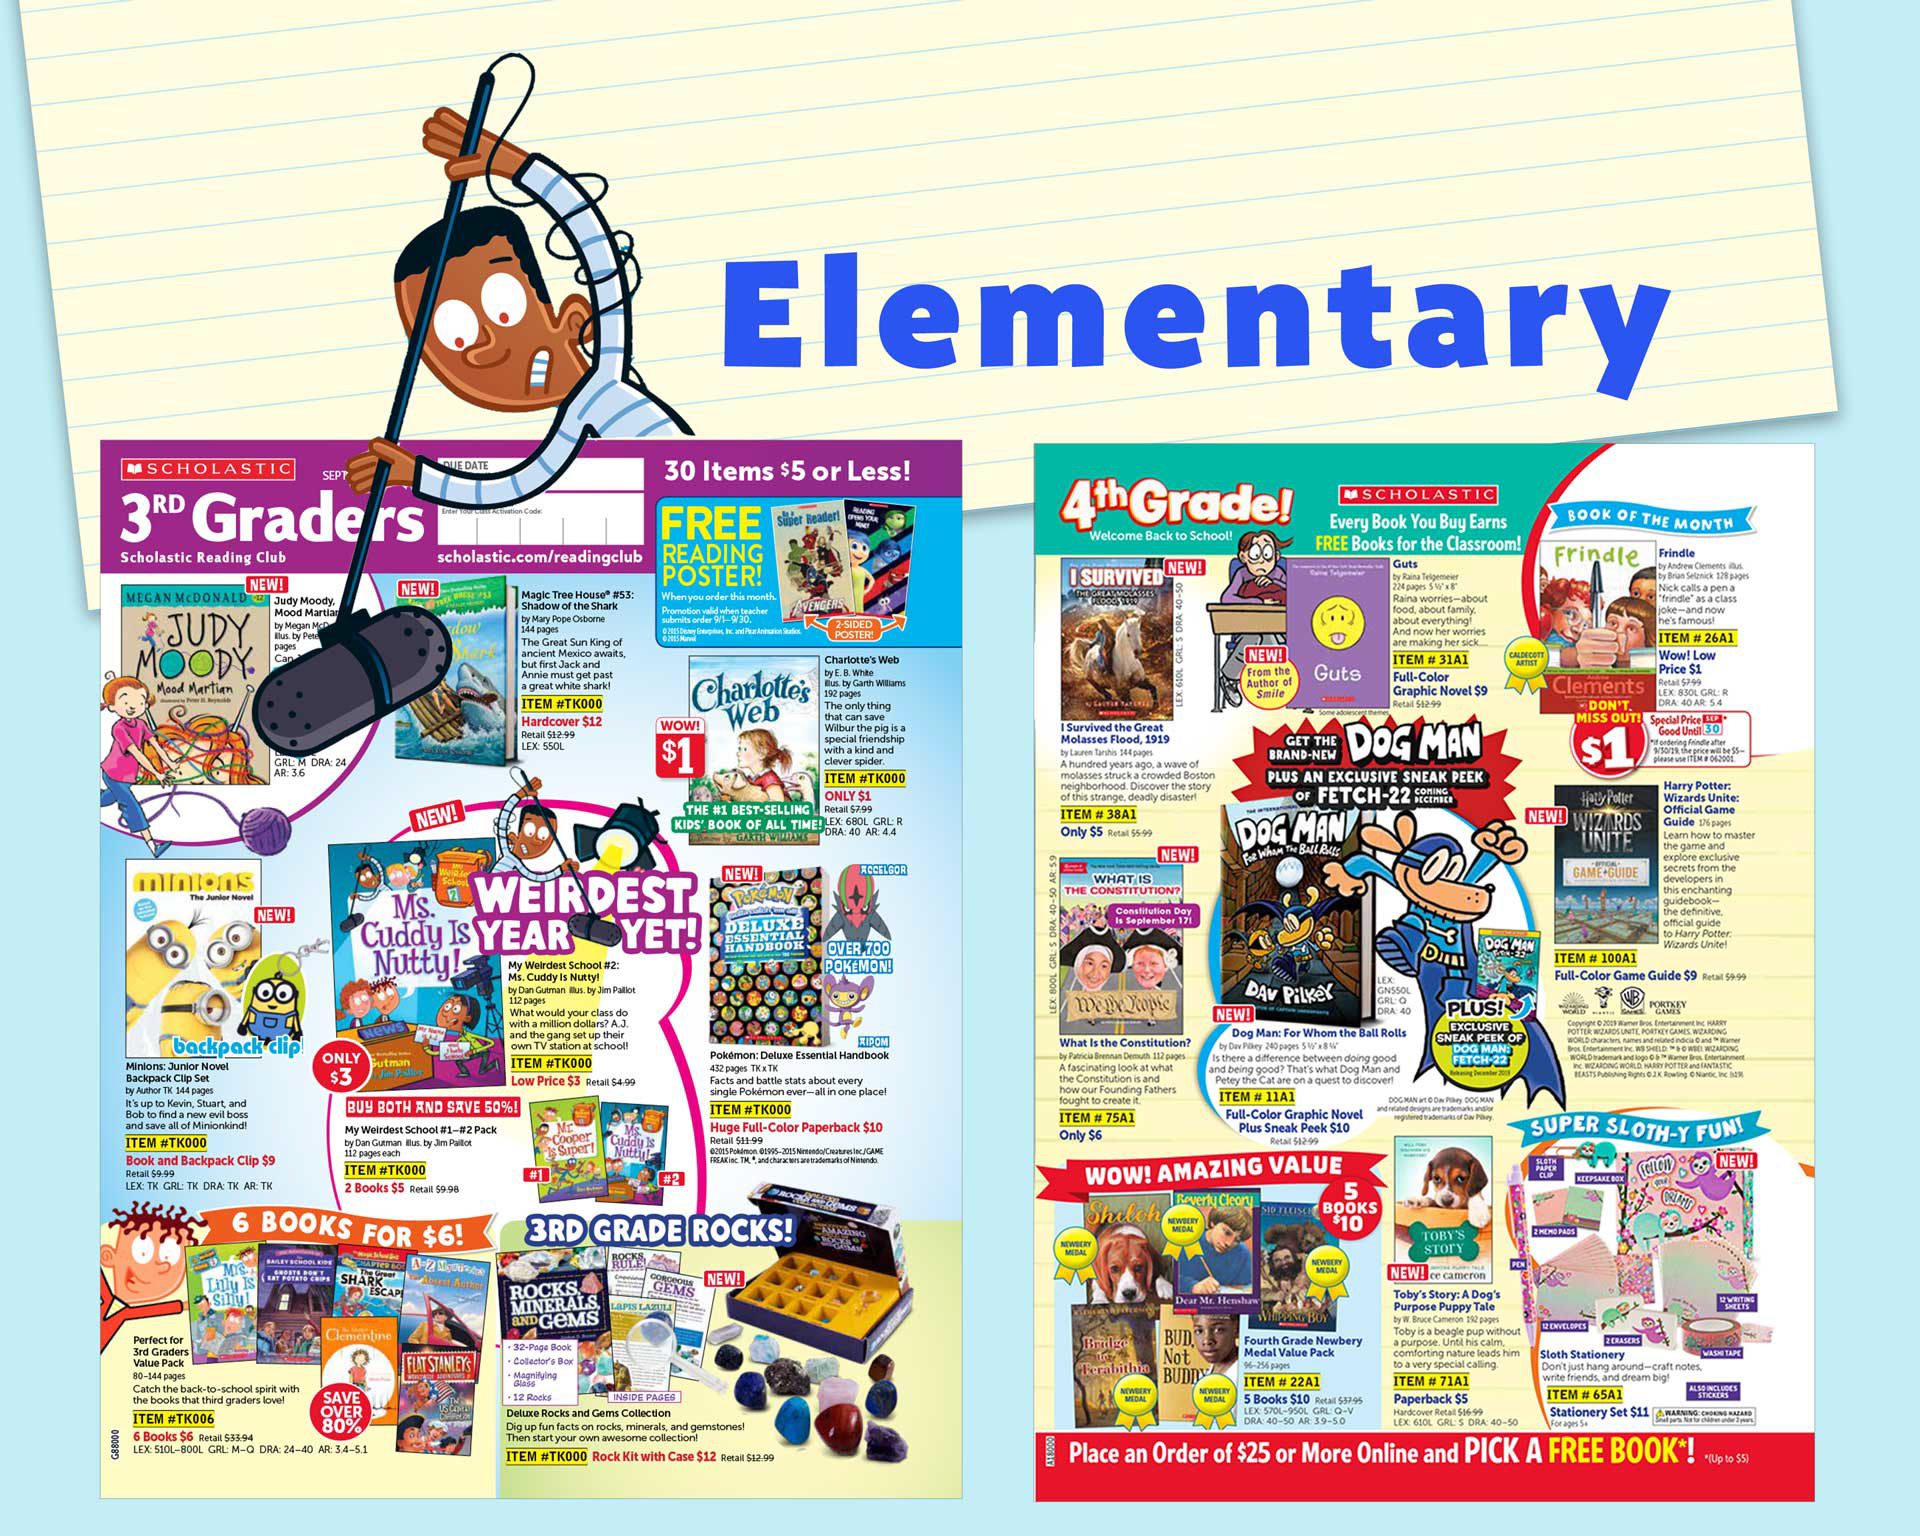 Scholastic Book Clubs: All Digital Flyers for 1st Grade September